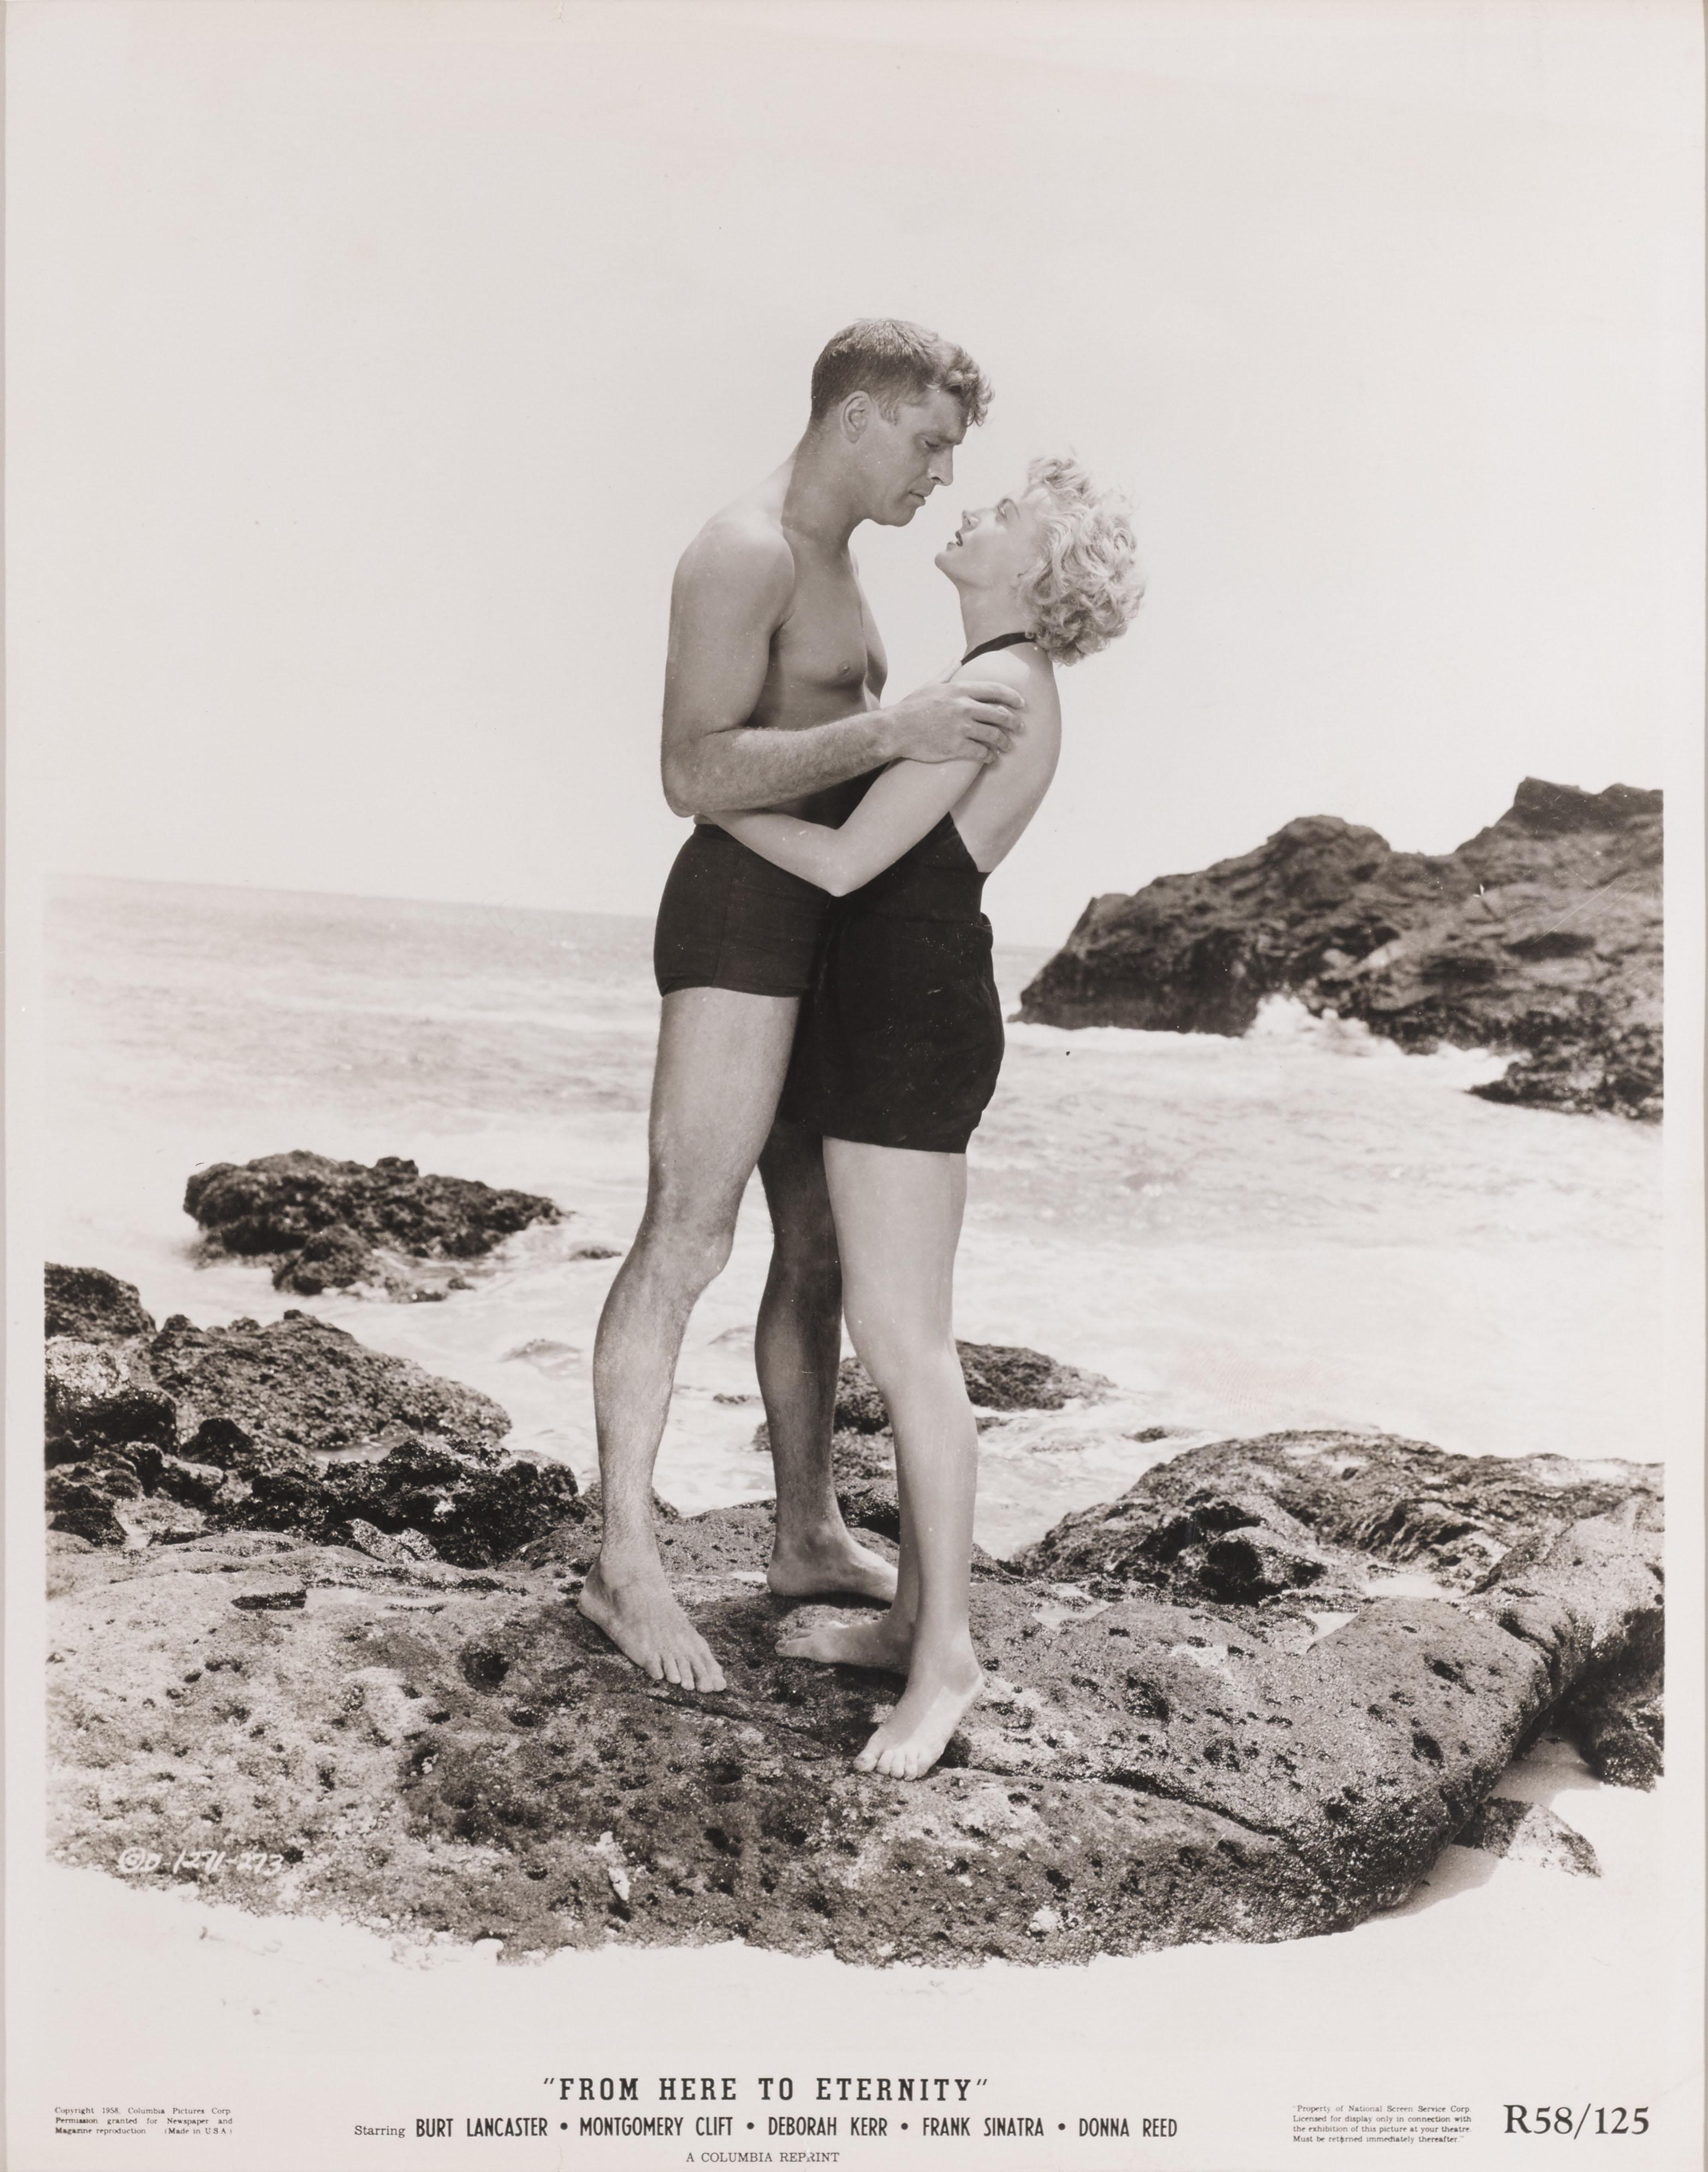 Original US photographic production still for the 1953 film From Here to Eternity.
This still is from the Re-release of the film in 1958.
The film Starred Burt Lancaster, Montgomery Clift, Deborah Kerr, Frank Sinatra. This film was directed by